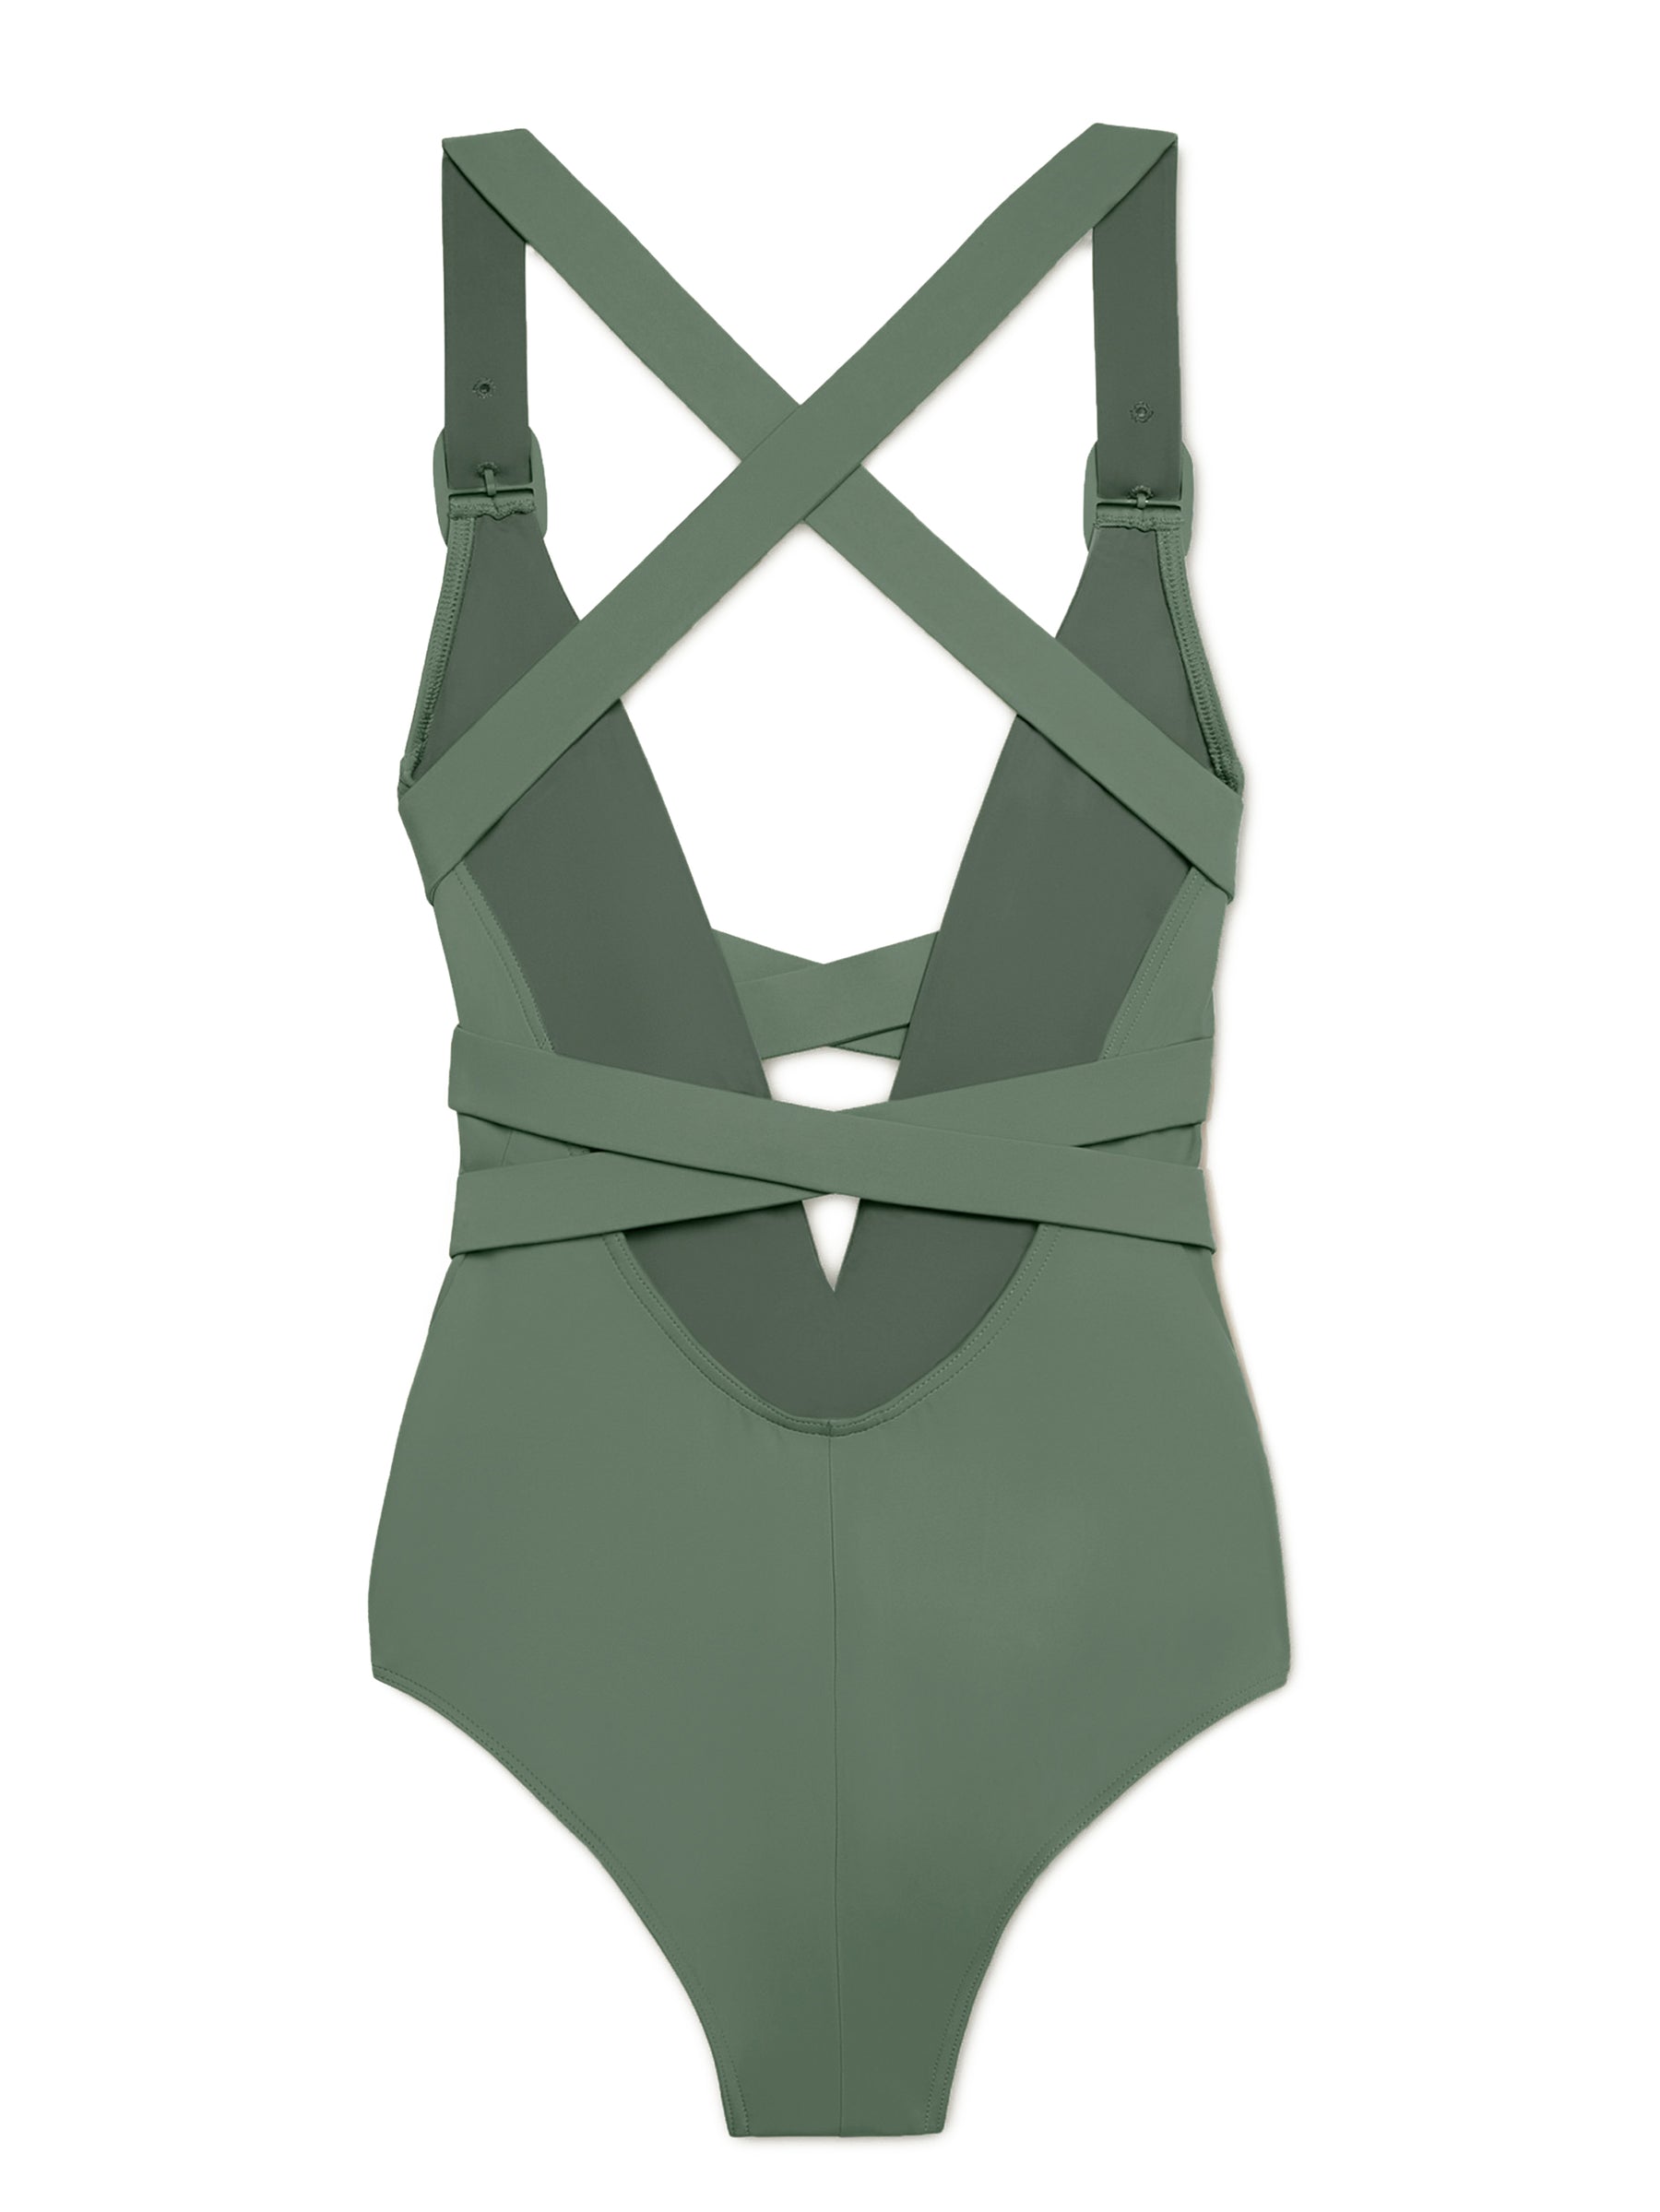 Seaquest One-Piece - Olive